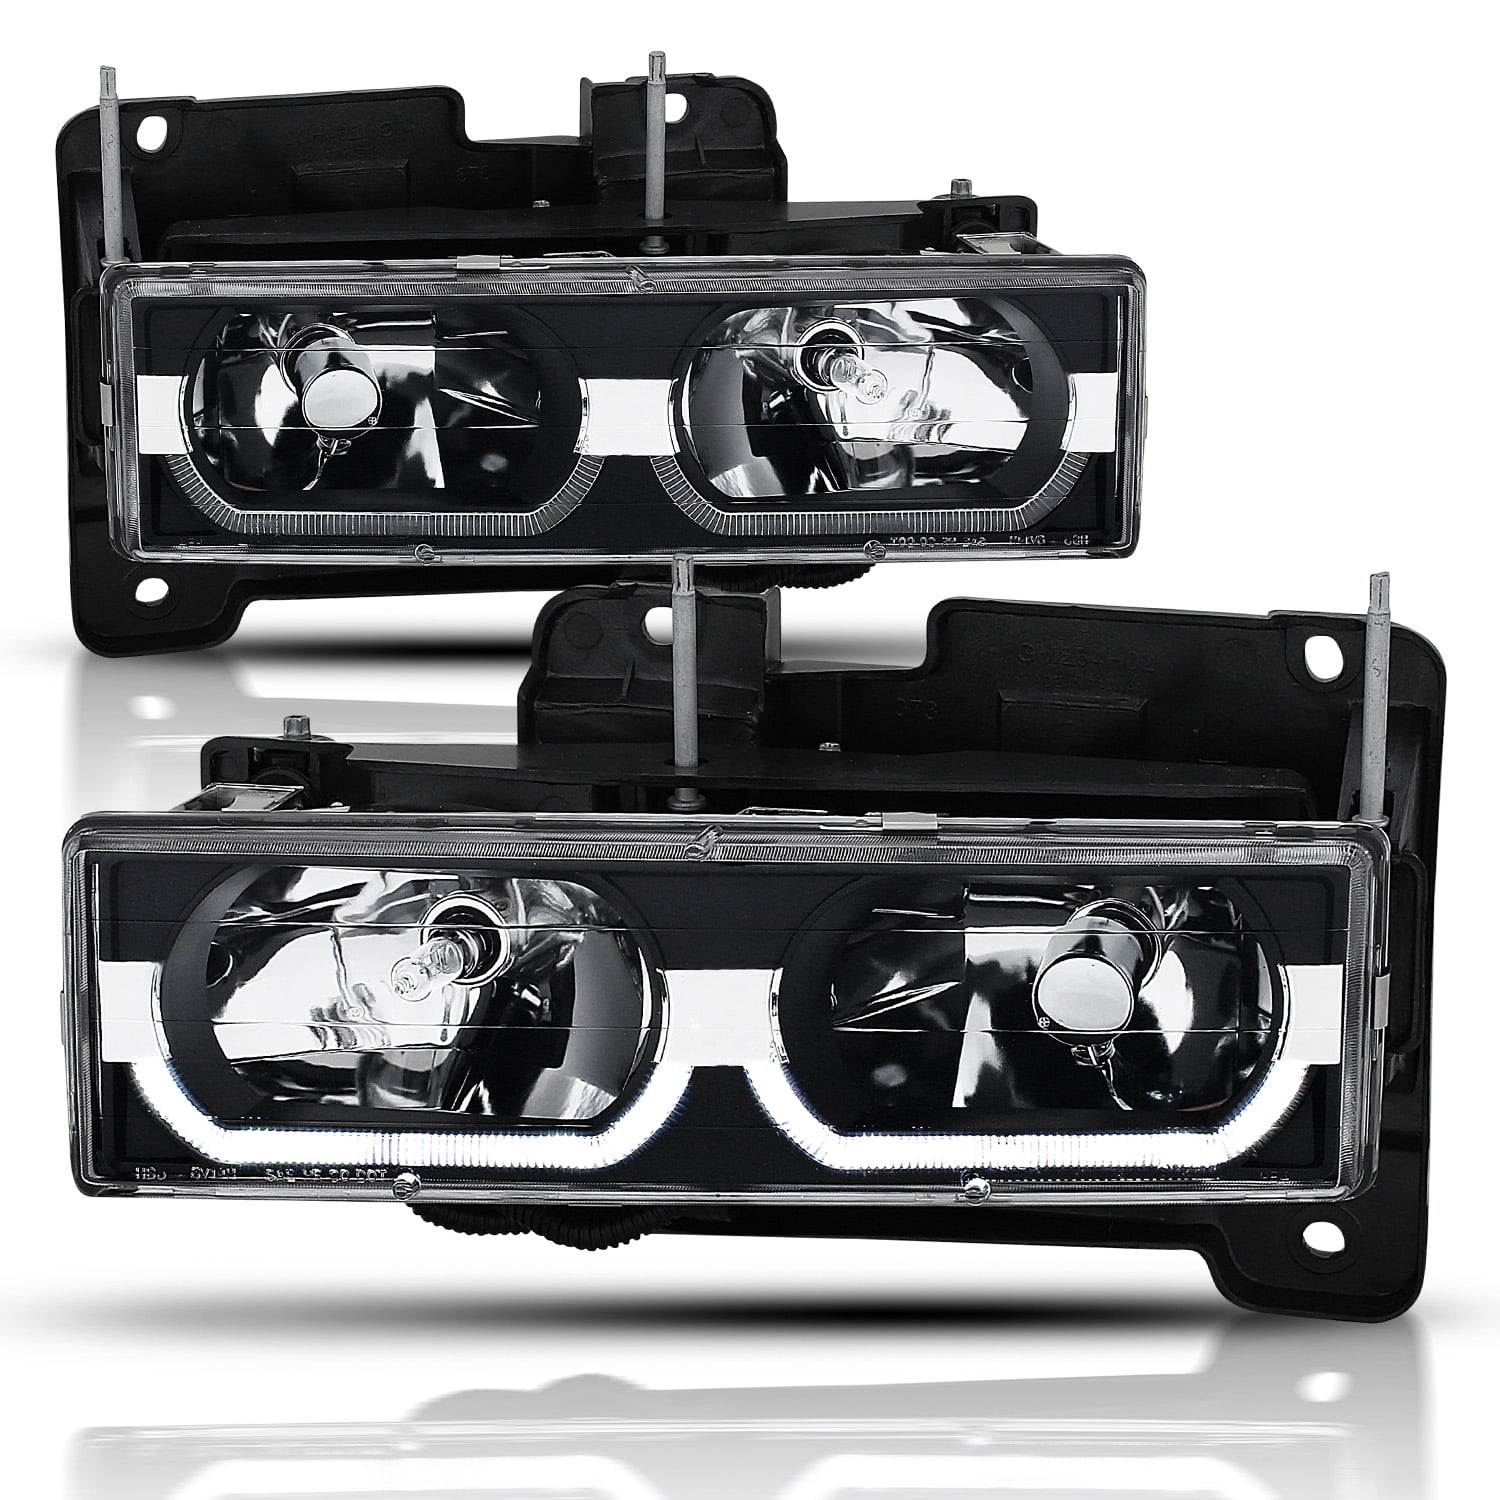 Passenger and Driver Side AmeriLite Clear Crystal LED Halo Headlights Pair for Chevy Fullsize Truck/SUV 